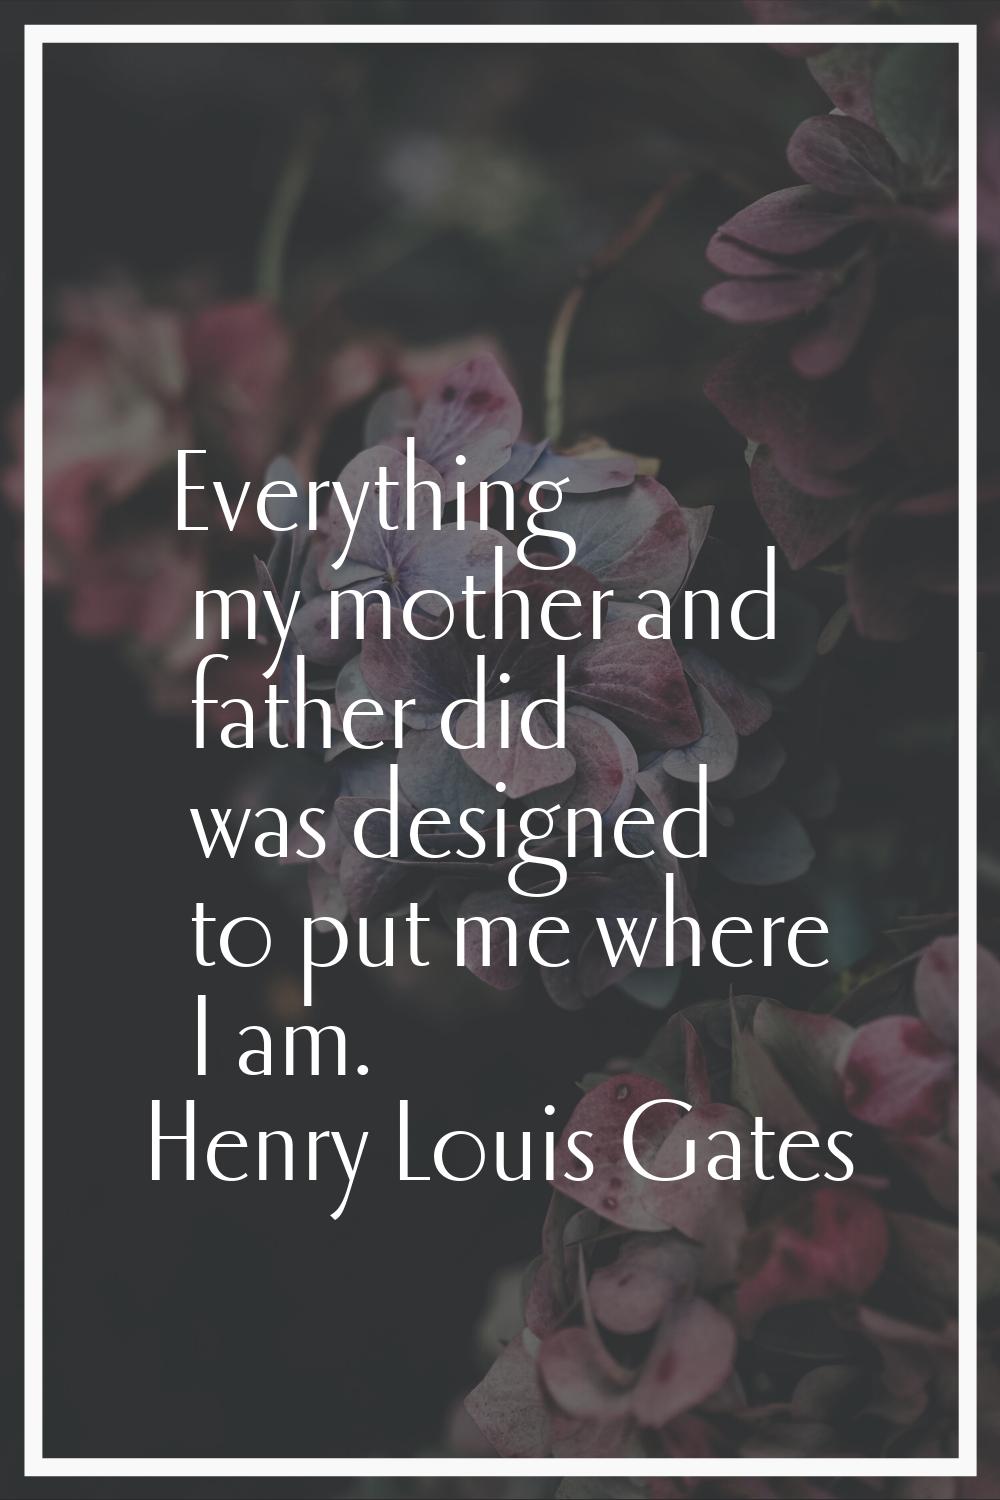 Everything my mother and father did was designed to put me where I am.